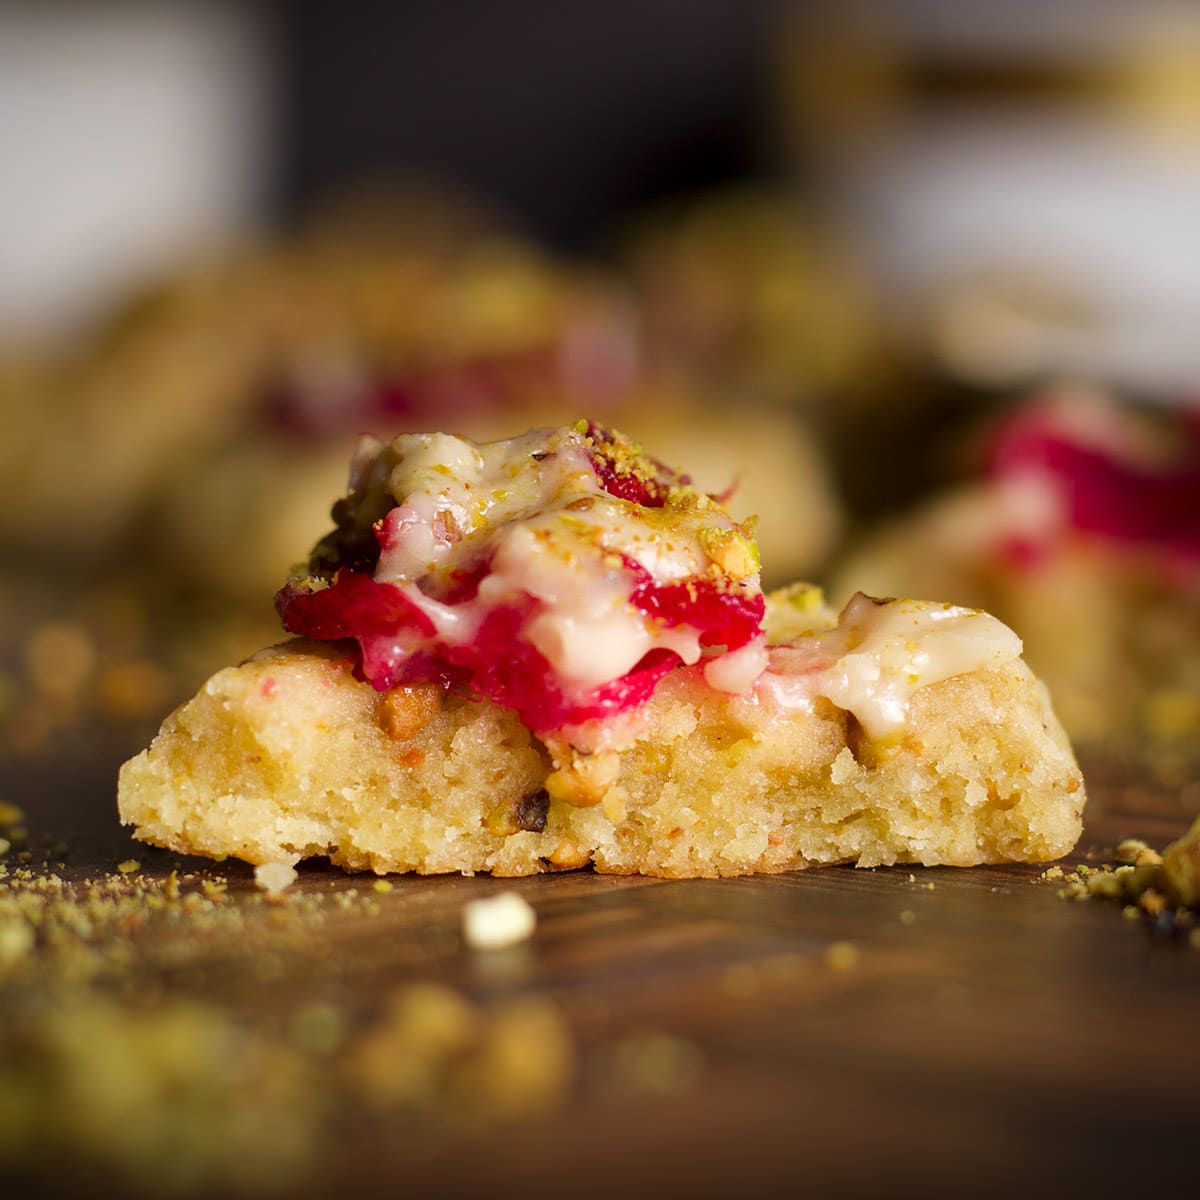 A cranberry pistachio cookie that's been broken in half to reveal the soft, buttery interior.